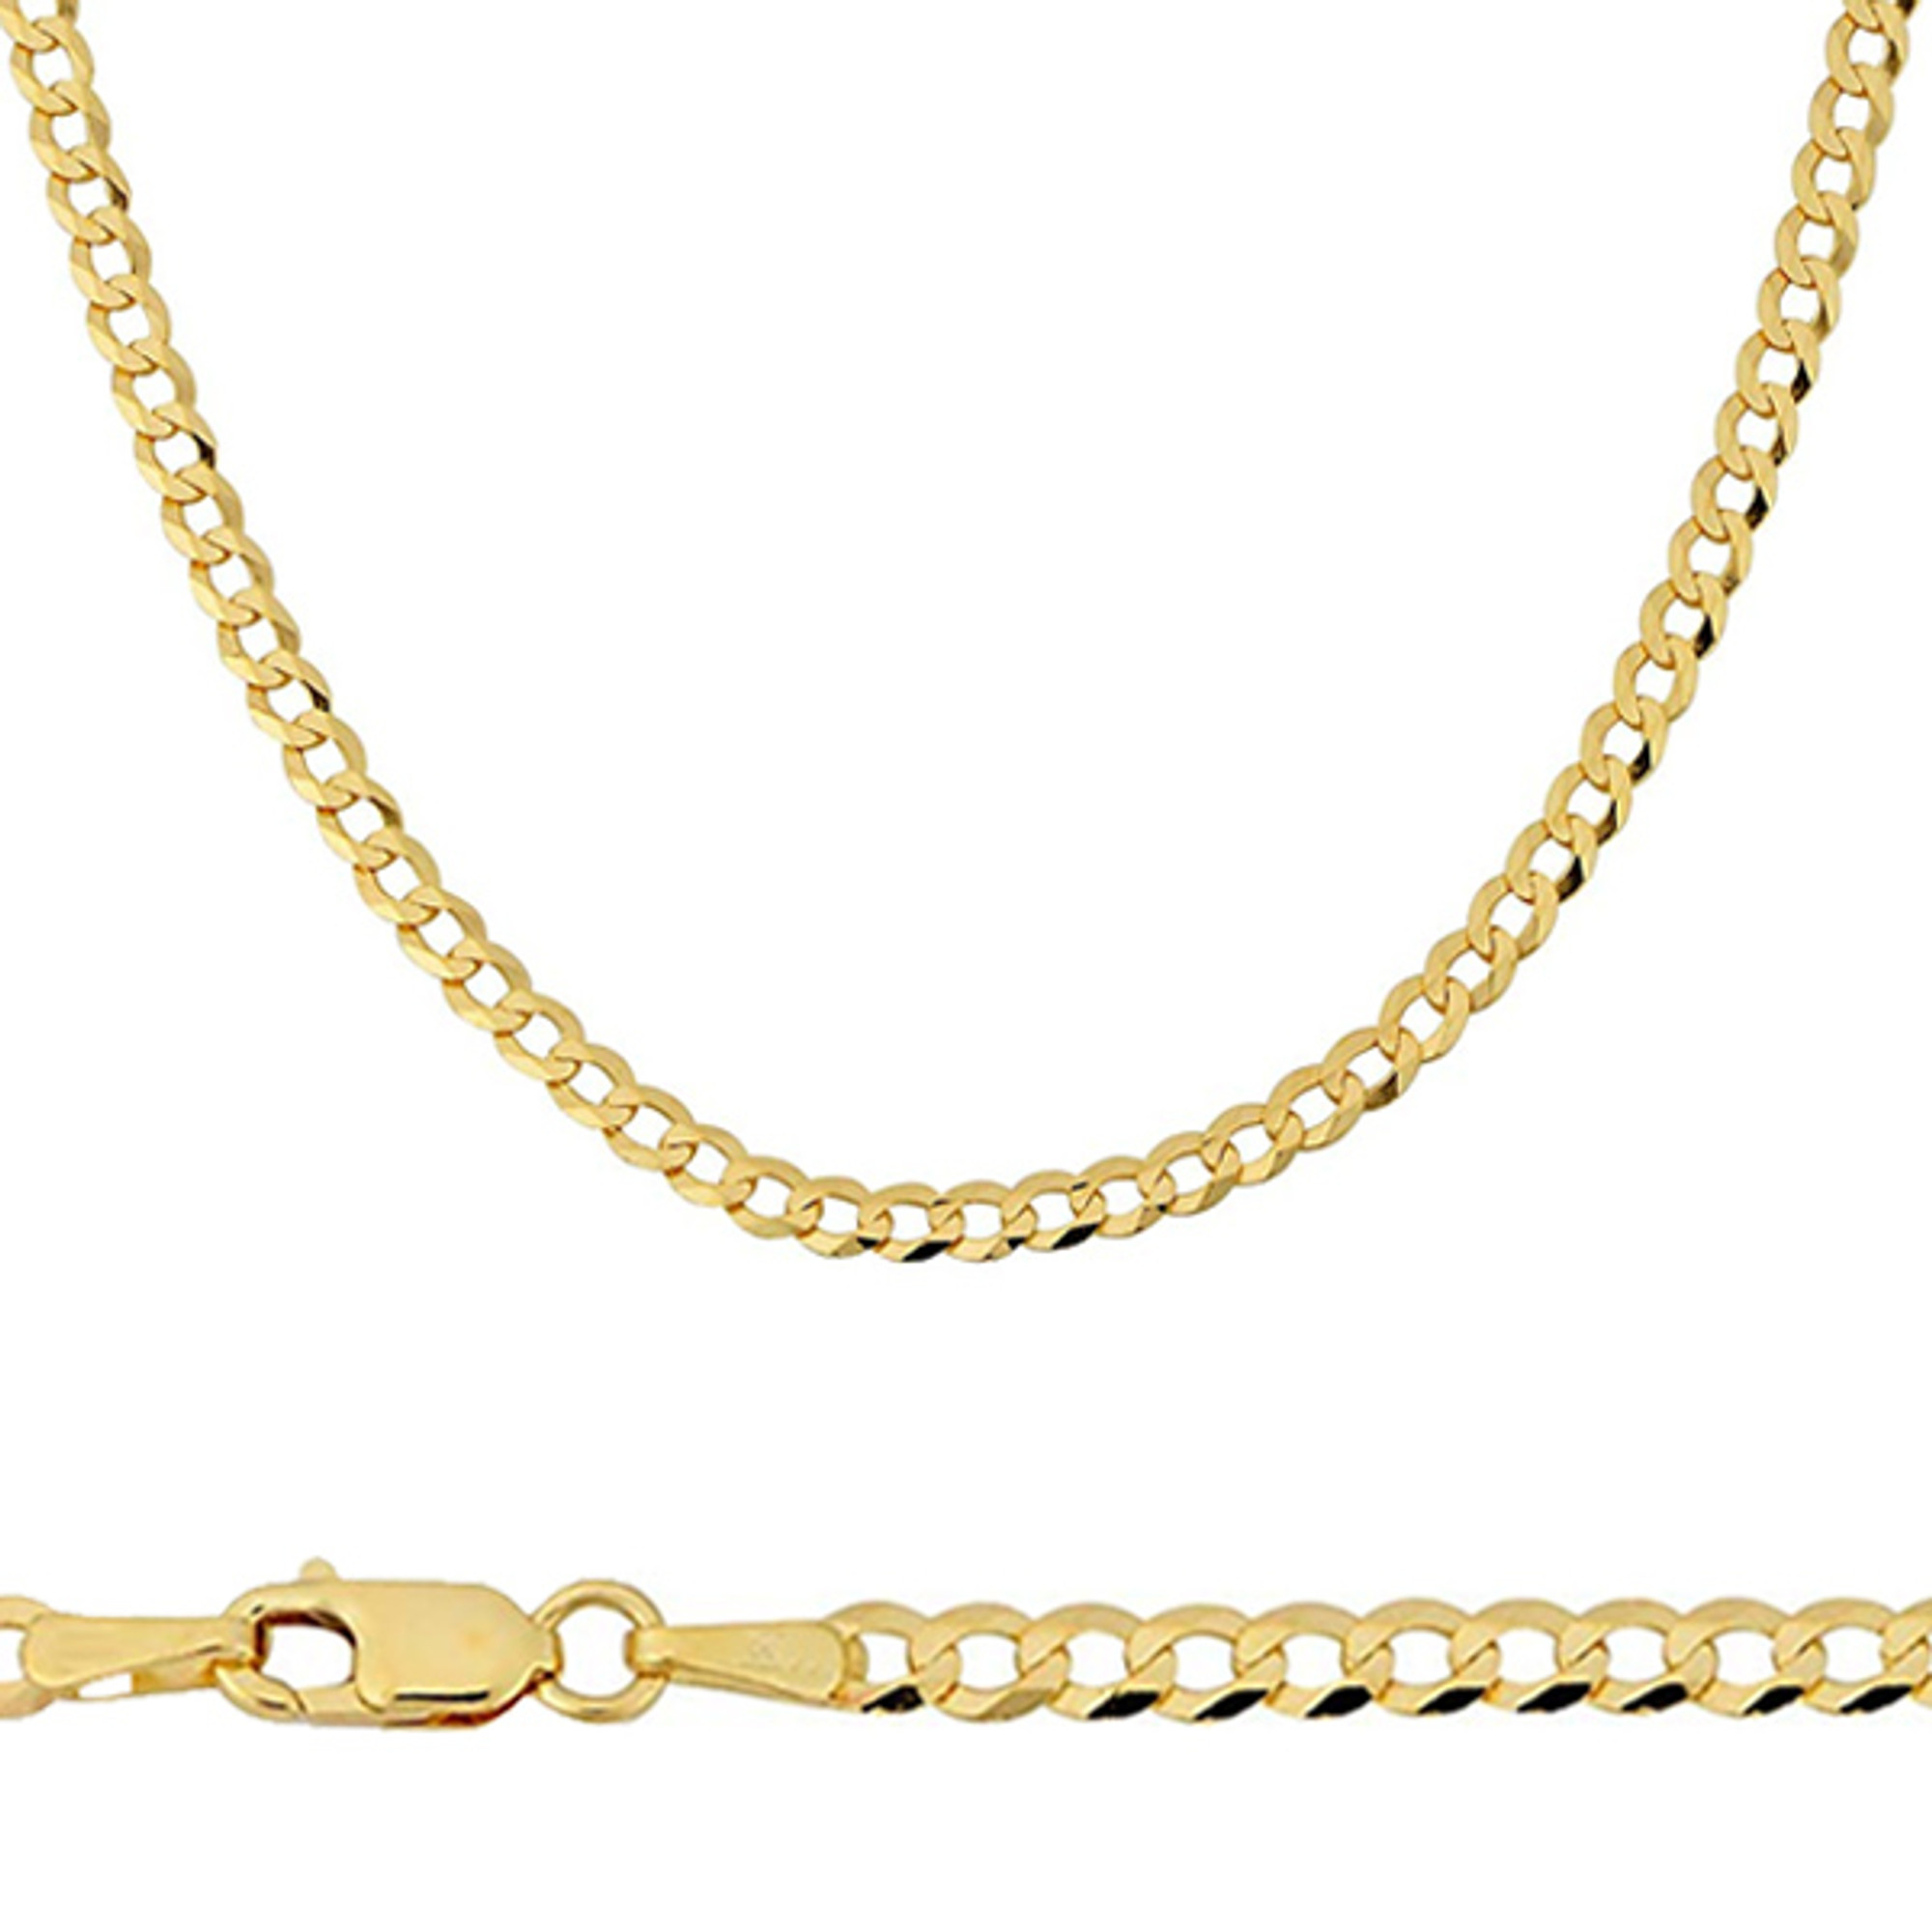 18 in 10 Karat Gold Chain (3 Small Links, 1 Large Link)